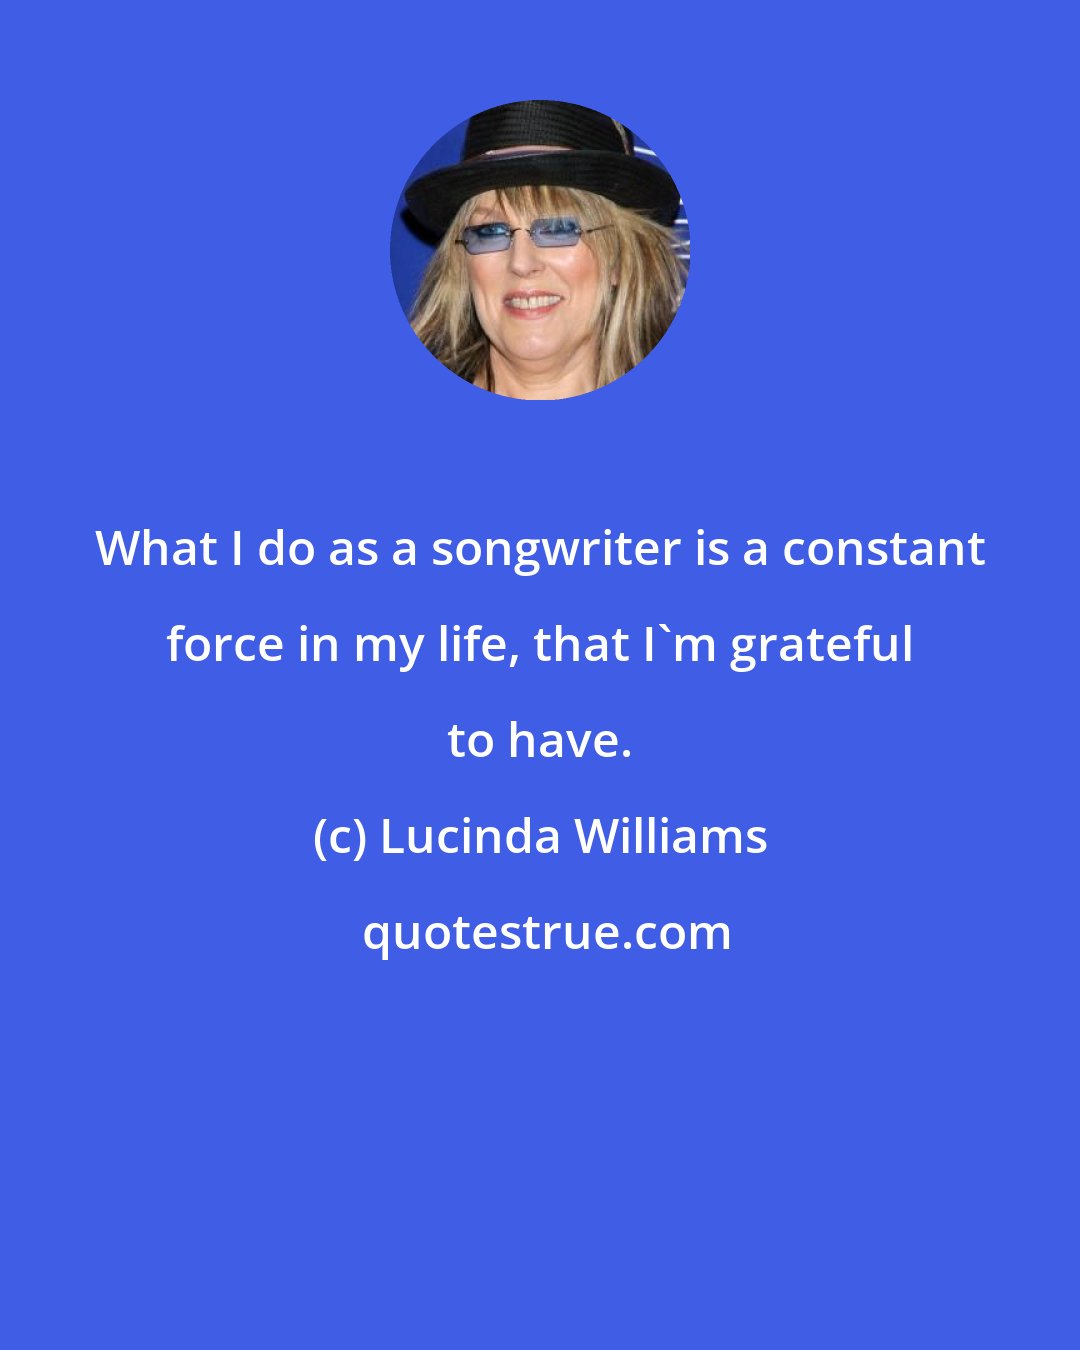 Lucinda Williams: What I do as a songwriter is a constant force in my life, that I'm grateful to have.